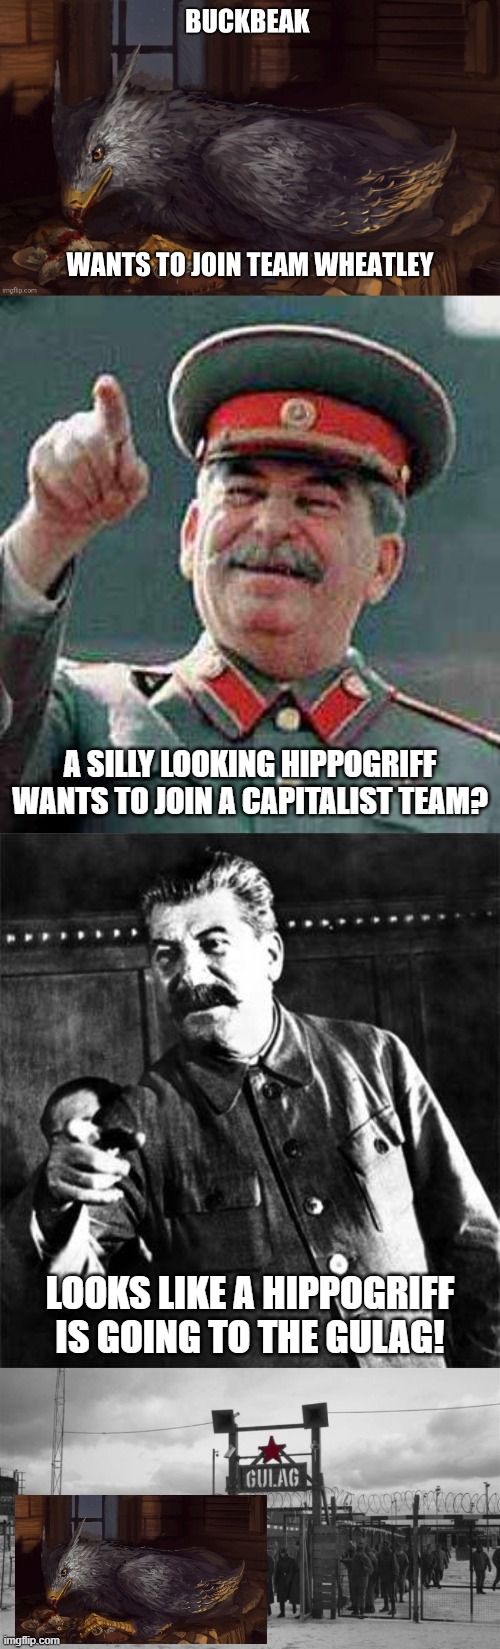 Hahahahaha GULAG! | A SILLY LOOKING HIPPOGRIFF WANTS TO JOIN A CAPITALIST TEAM? LOOKS LIKE A HIPPOGRIFF IS GOING TO THE GULAG! | image tagged in stalin says,stalin,gulag,joseph stalin | made w/ Imgflip meme maker